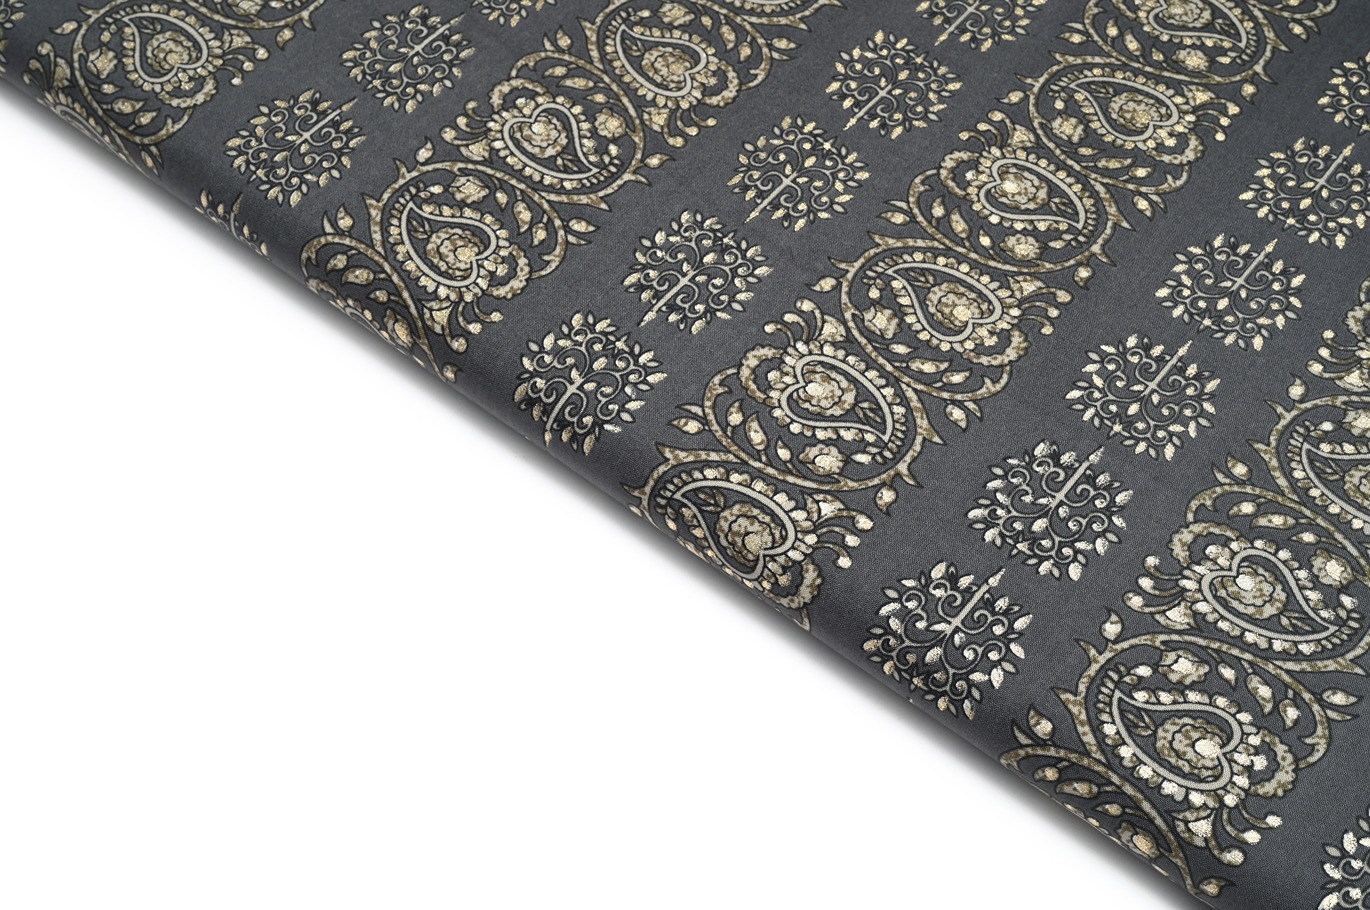 ROYAL CREST BROWN COLOR COTTON BLEND RAYON PAISLEY BORDER & GEOMETRIC MOTIVE WITH GOLD FOIL PATTERN PRINTED FABRIC 9067